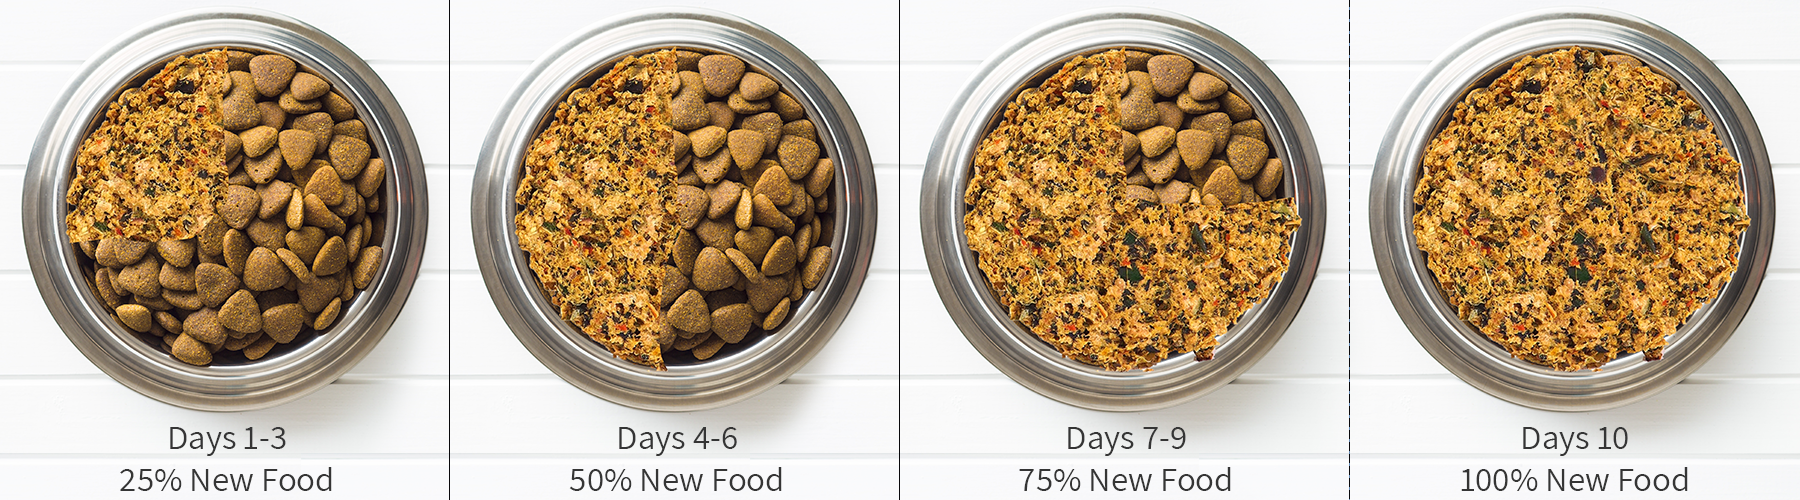 How to transition the dog food. There are four bowls - the first shows that on days 1-3 that it should be 25% new food and 75% their same food. On days 4-6 it should be 50% new food. On days 7-9 it should be 75% new food. Day 10 100% new food.